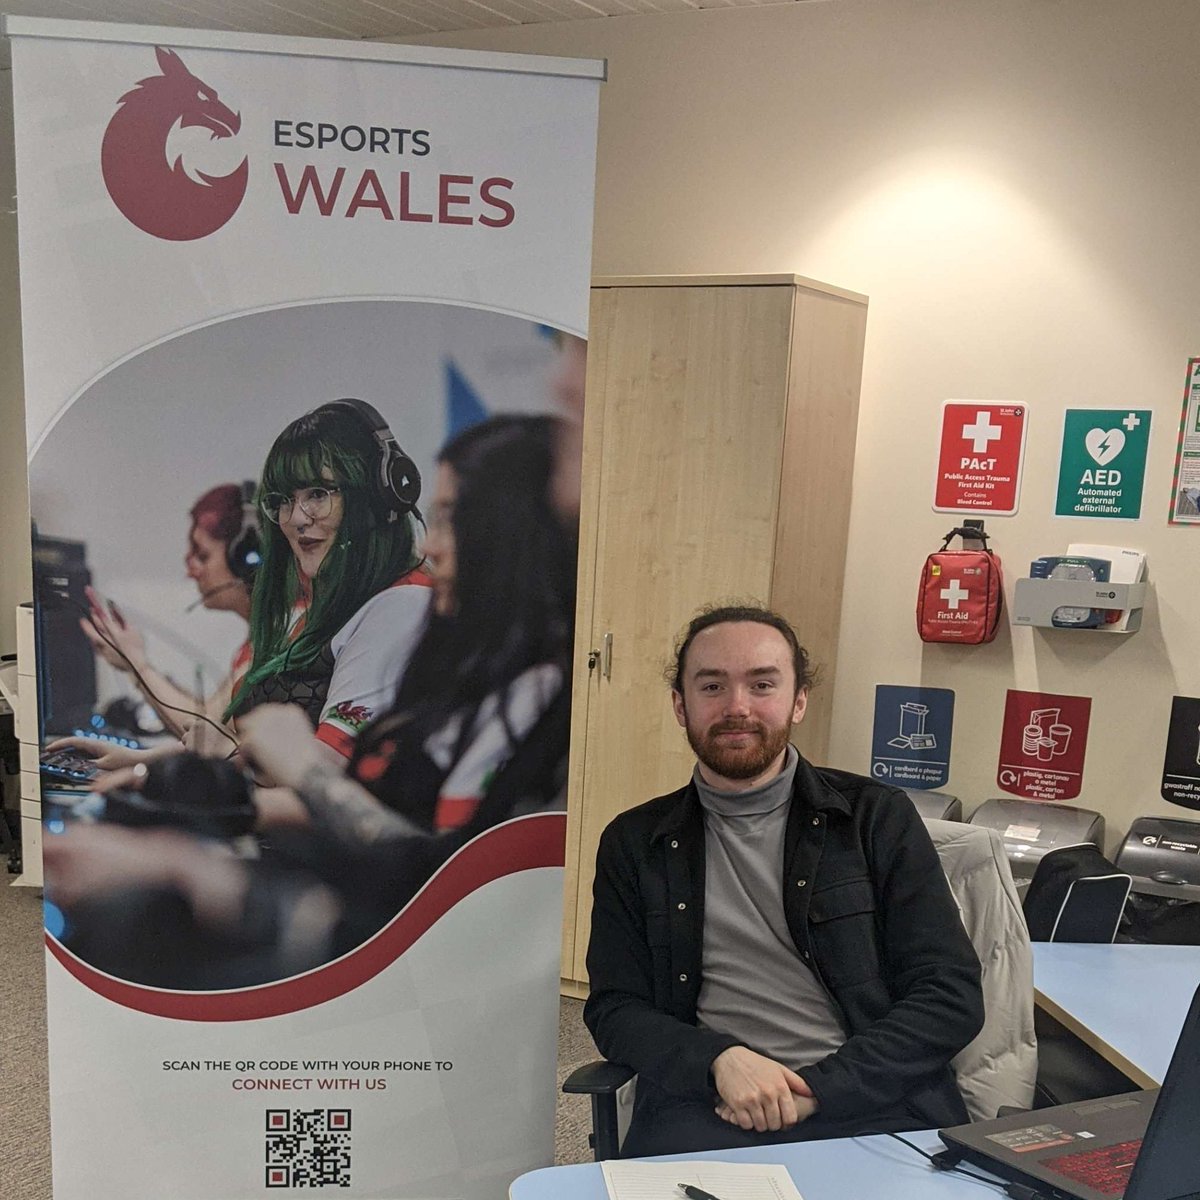 Hey All! We are in the Business Fair in #Bargoed today! Come along and find out all about opportunities in the esports and gaming industry.